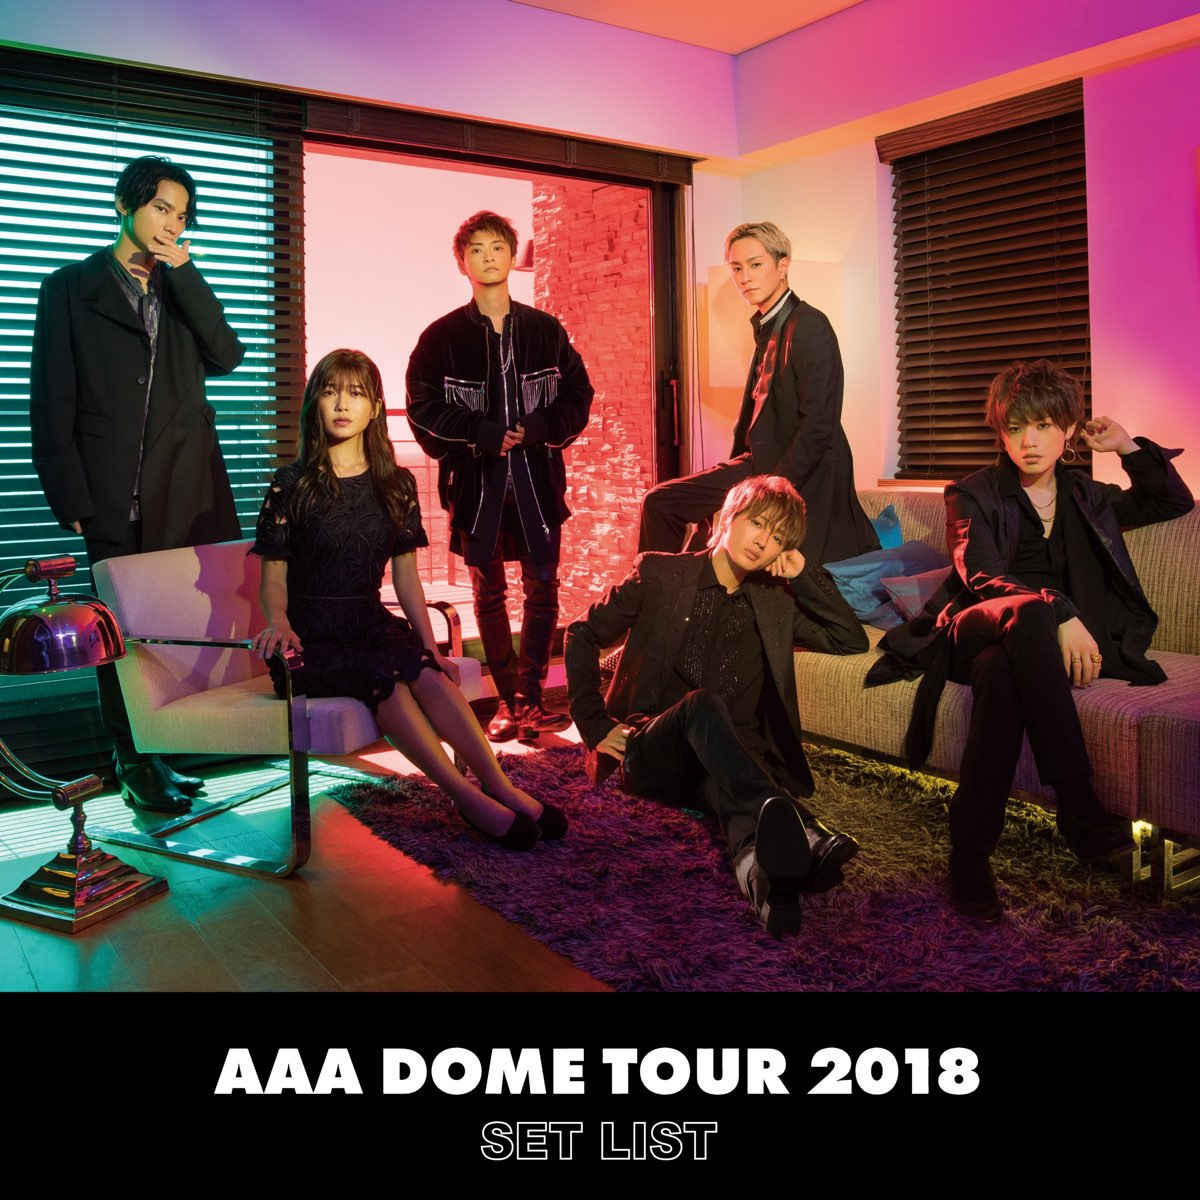 AAA DOME TOUR 2018 COLOR A LIFE -SET LIST- - Album by AAA - Apple